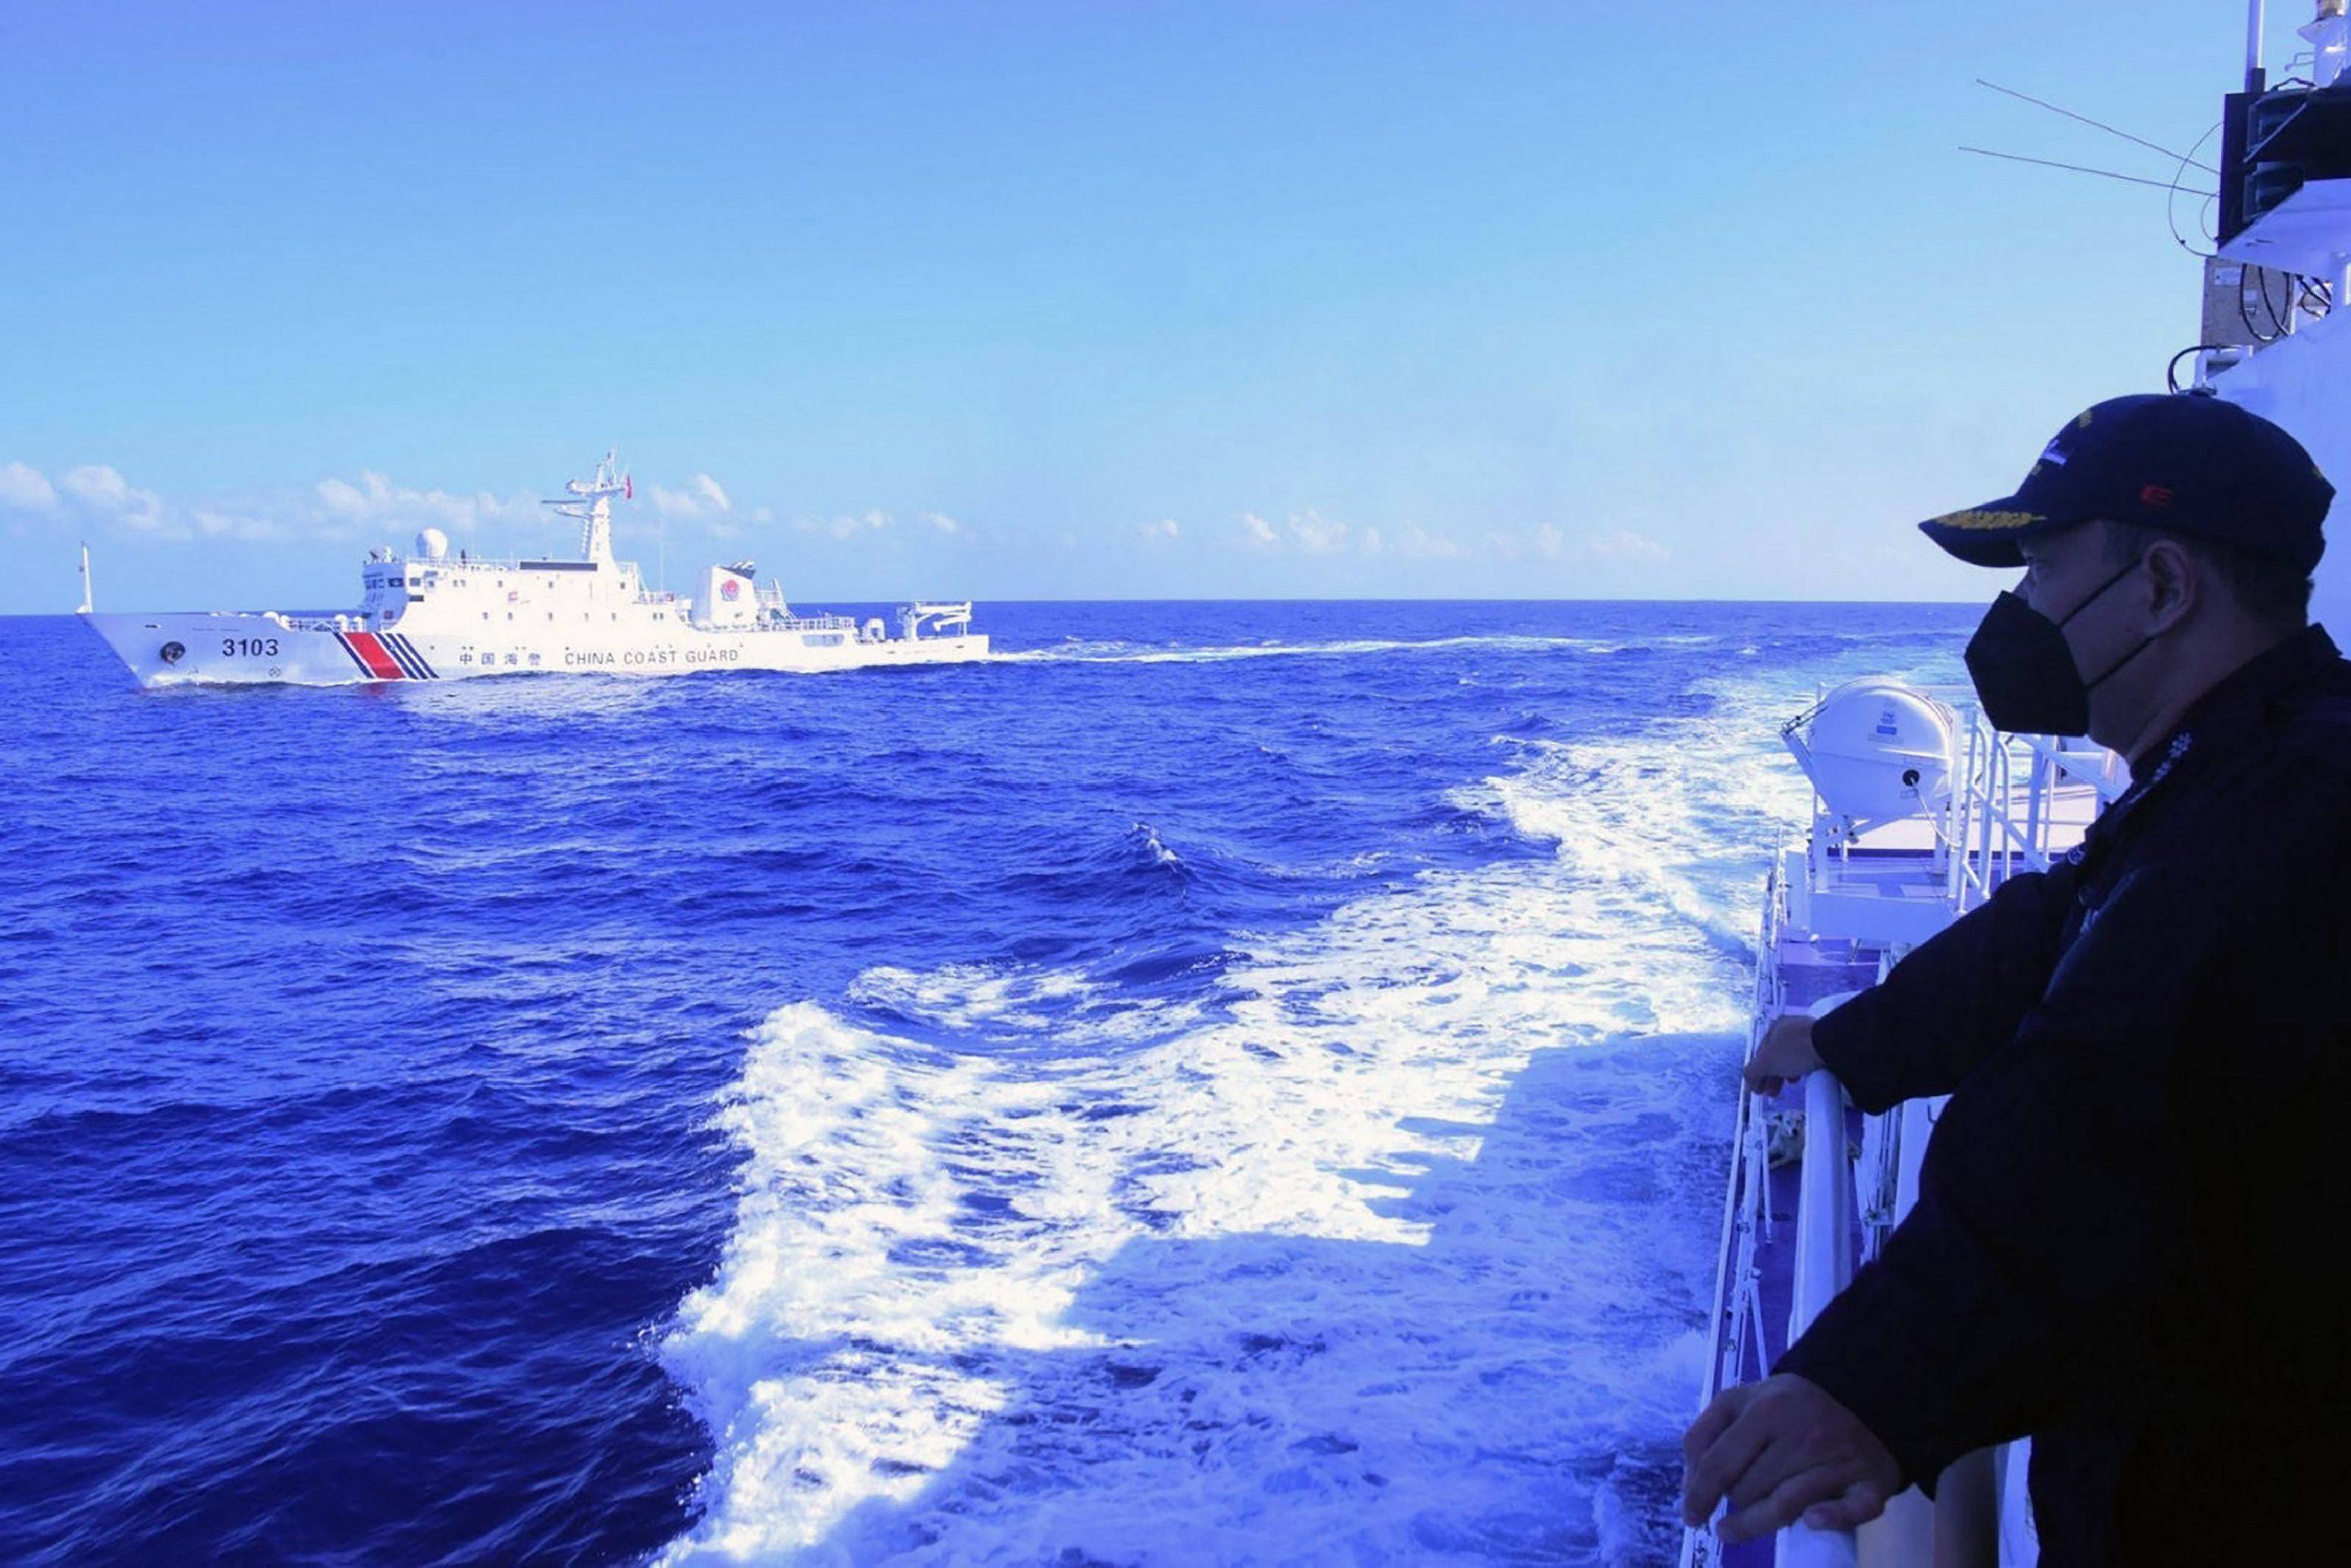 The Philippine coastguard monitors a Chinese patrol ship in a disputed area of the South China Sea. Photo: AFP